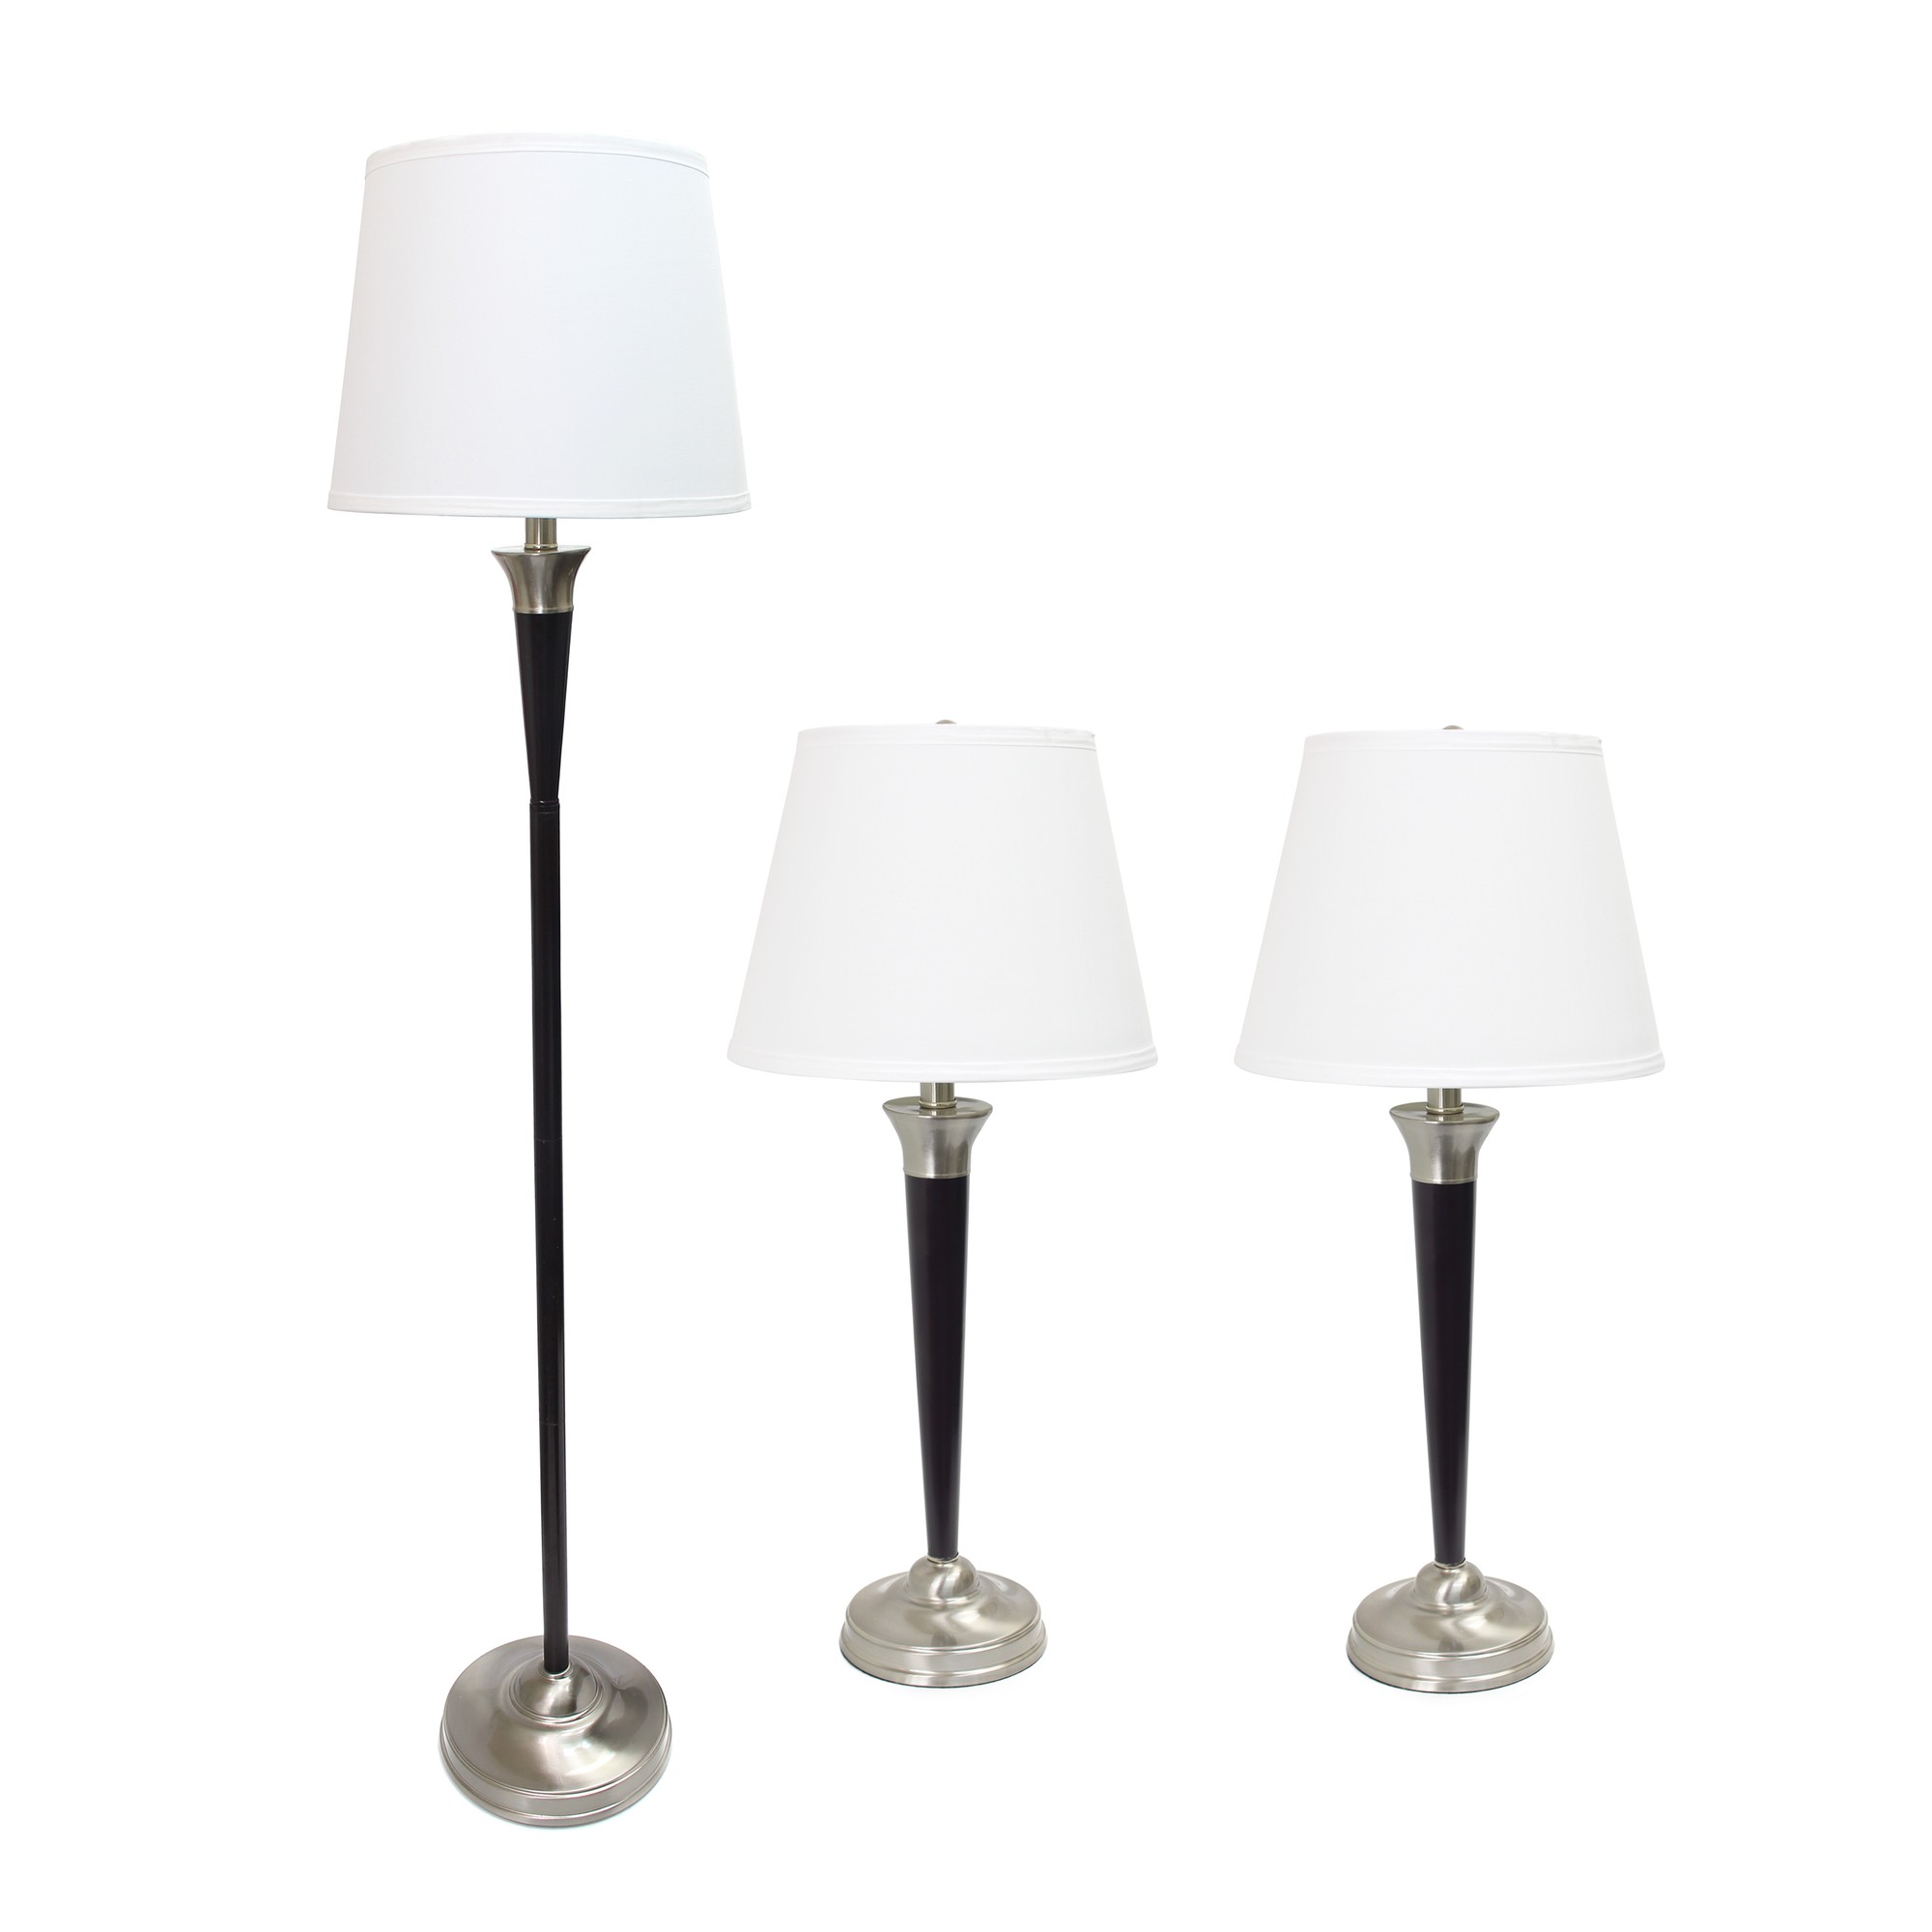 Lalia Home 3 Piece Metal Lamp Set (2 Table Lamps, 1 Floor Lamp) White Shades with Malbec Black and Brushed Nickel Finish